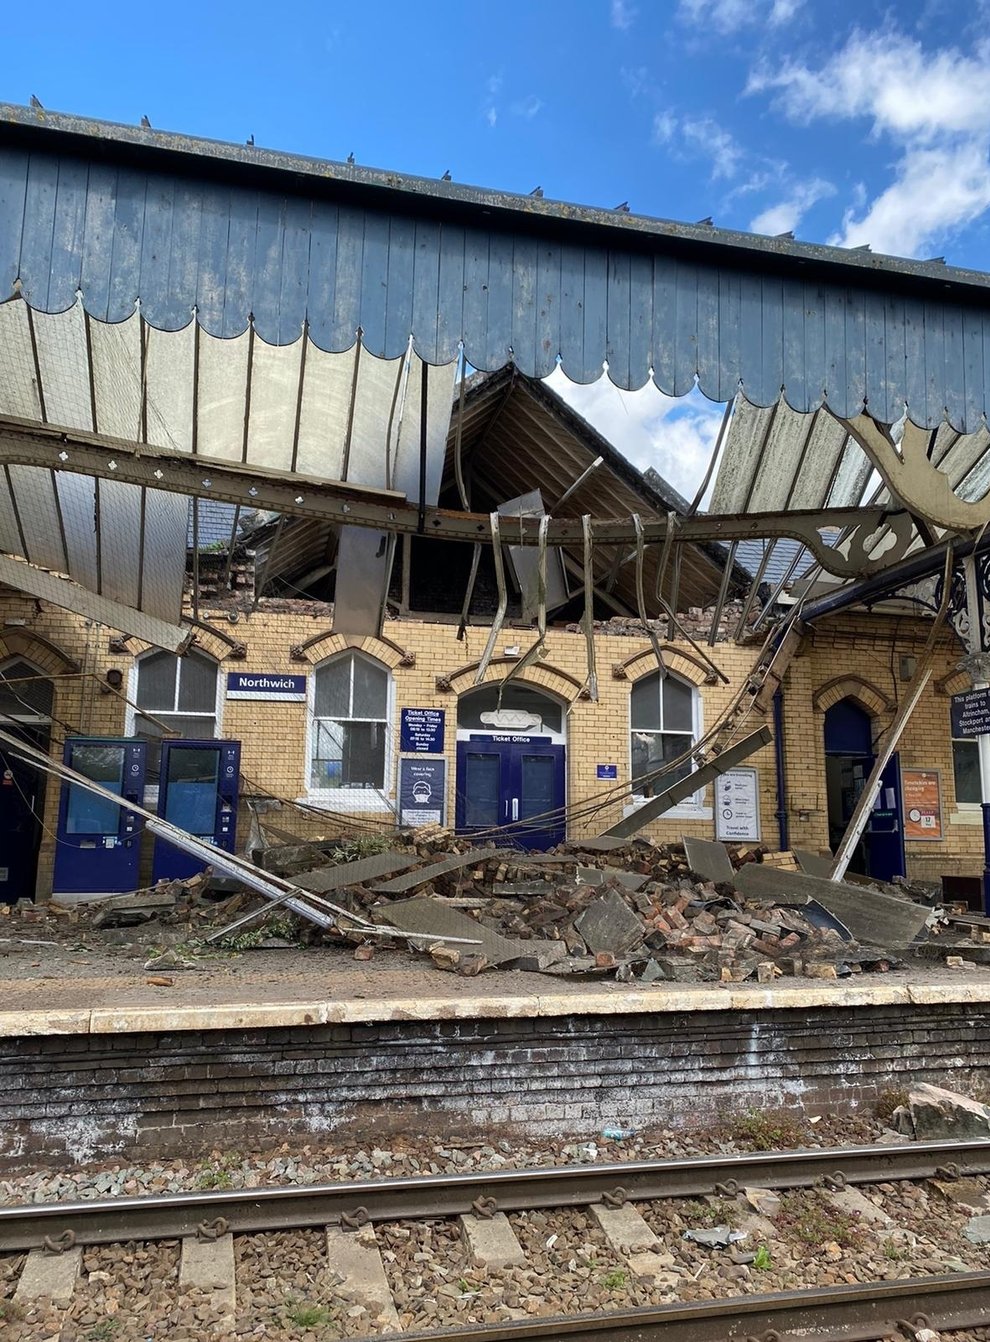 Bricks and other building materials crashed onto a railway station platform when a roof and wall collapsed (Northwich fire station/PA)